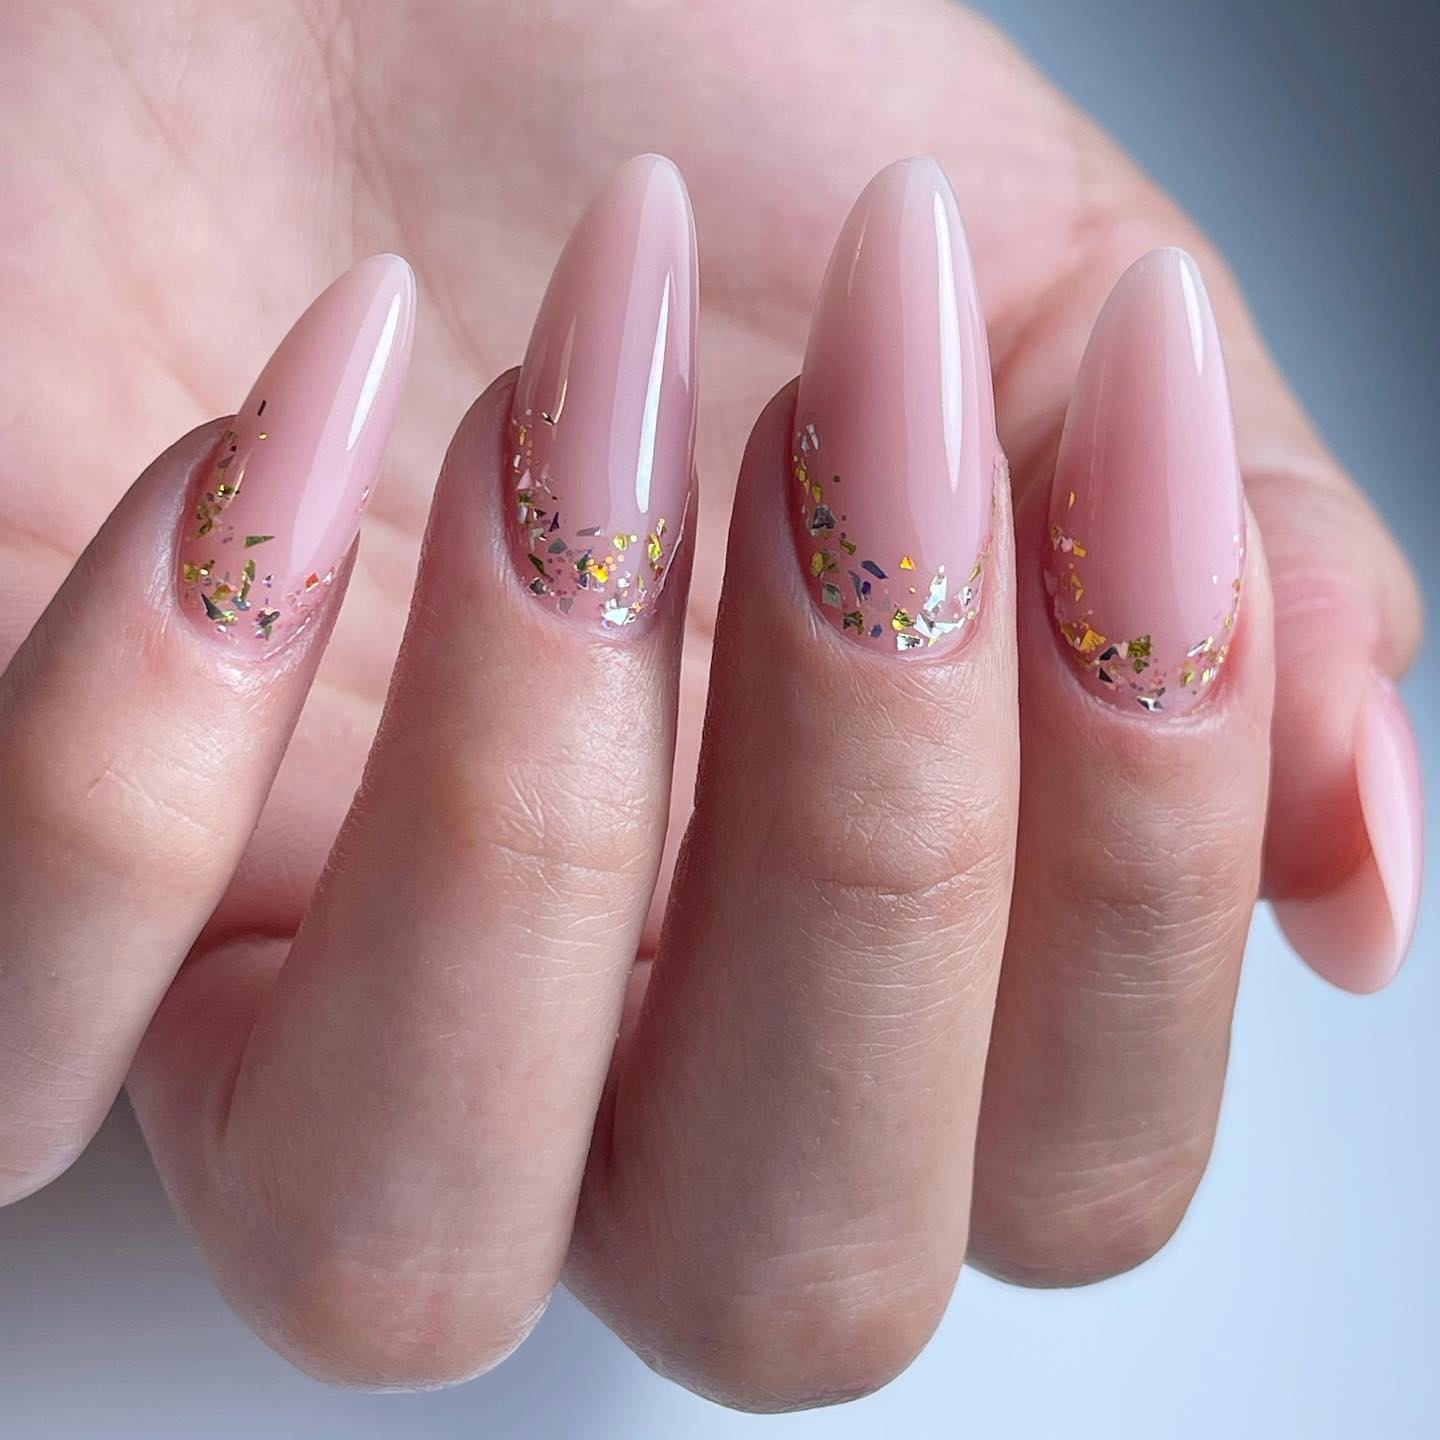 Shiny pinkish nude nail polish is ready to boost your mood with its perfect look. Your purity will be a best match with this color. Let's go and get it.